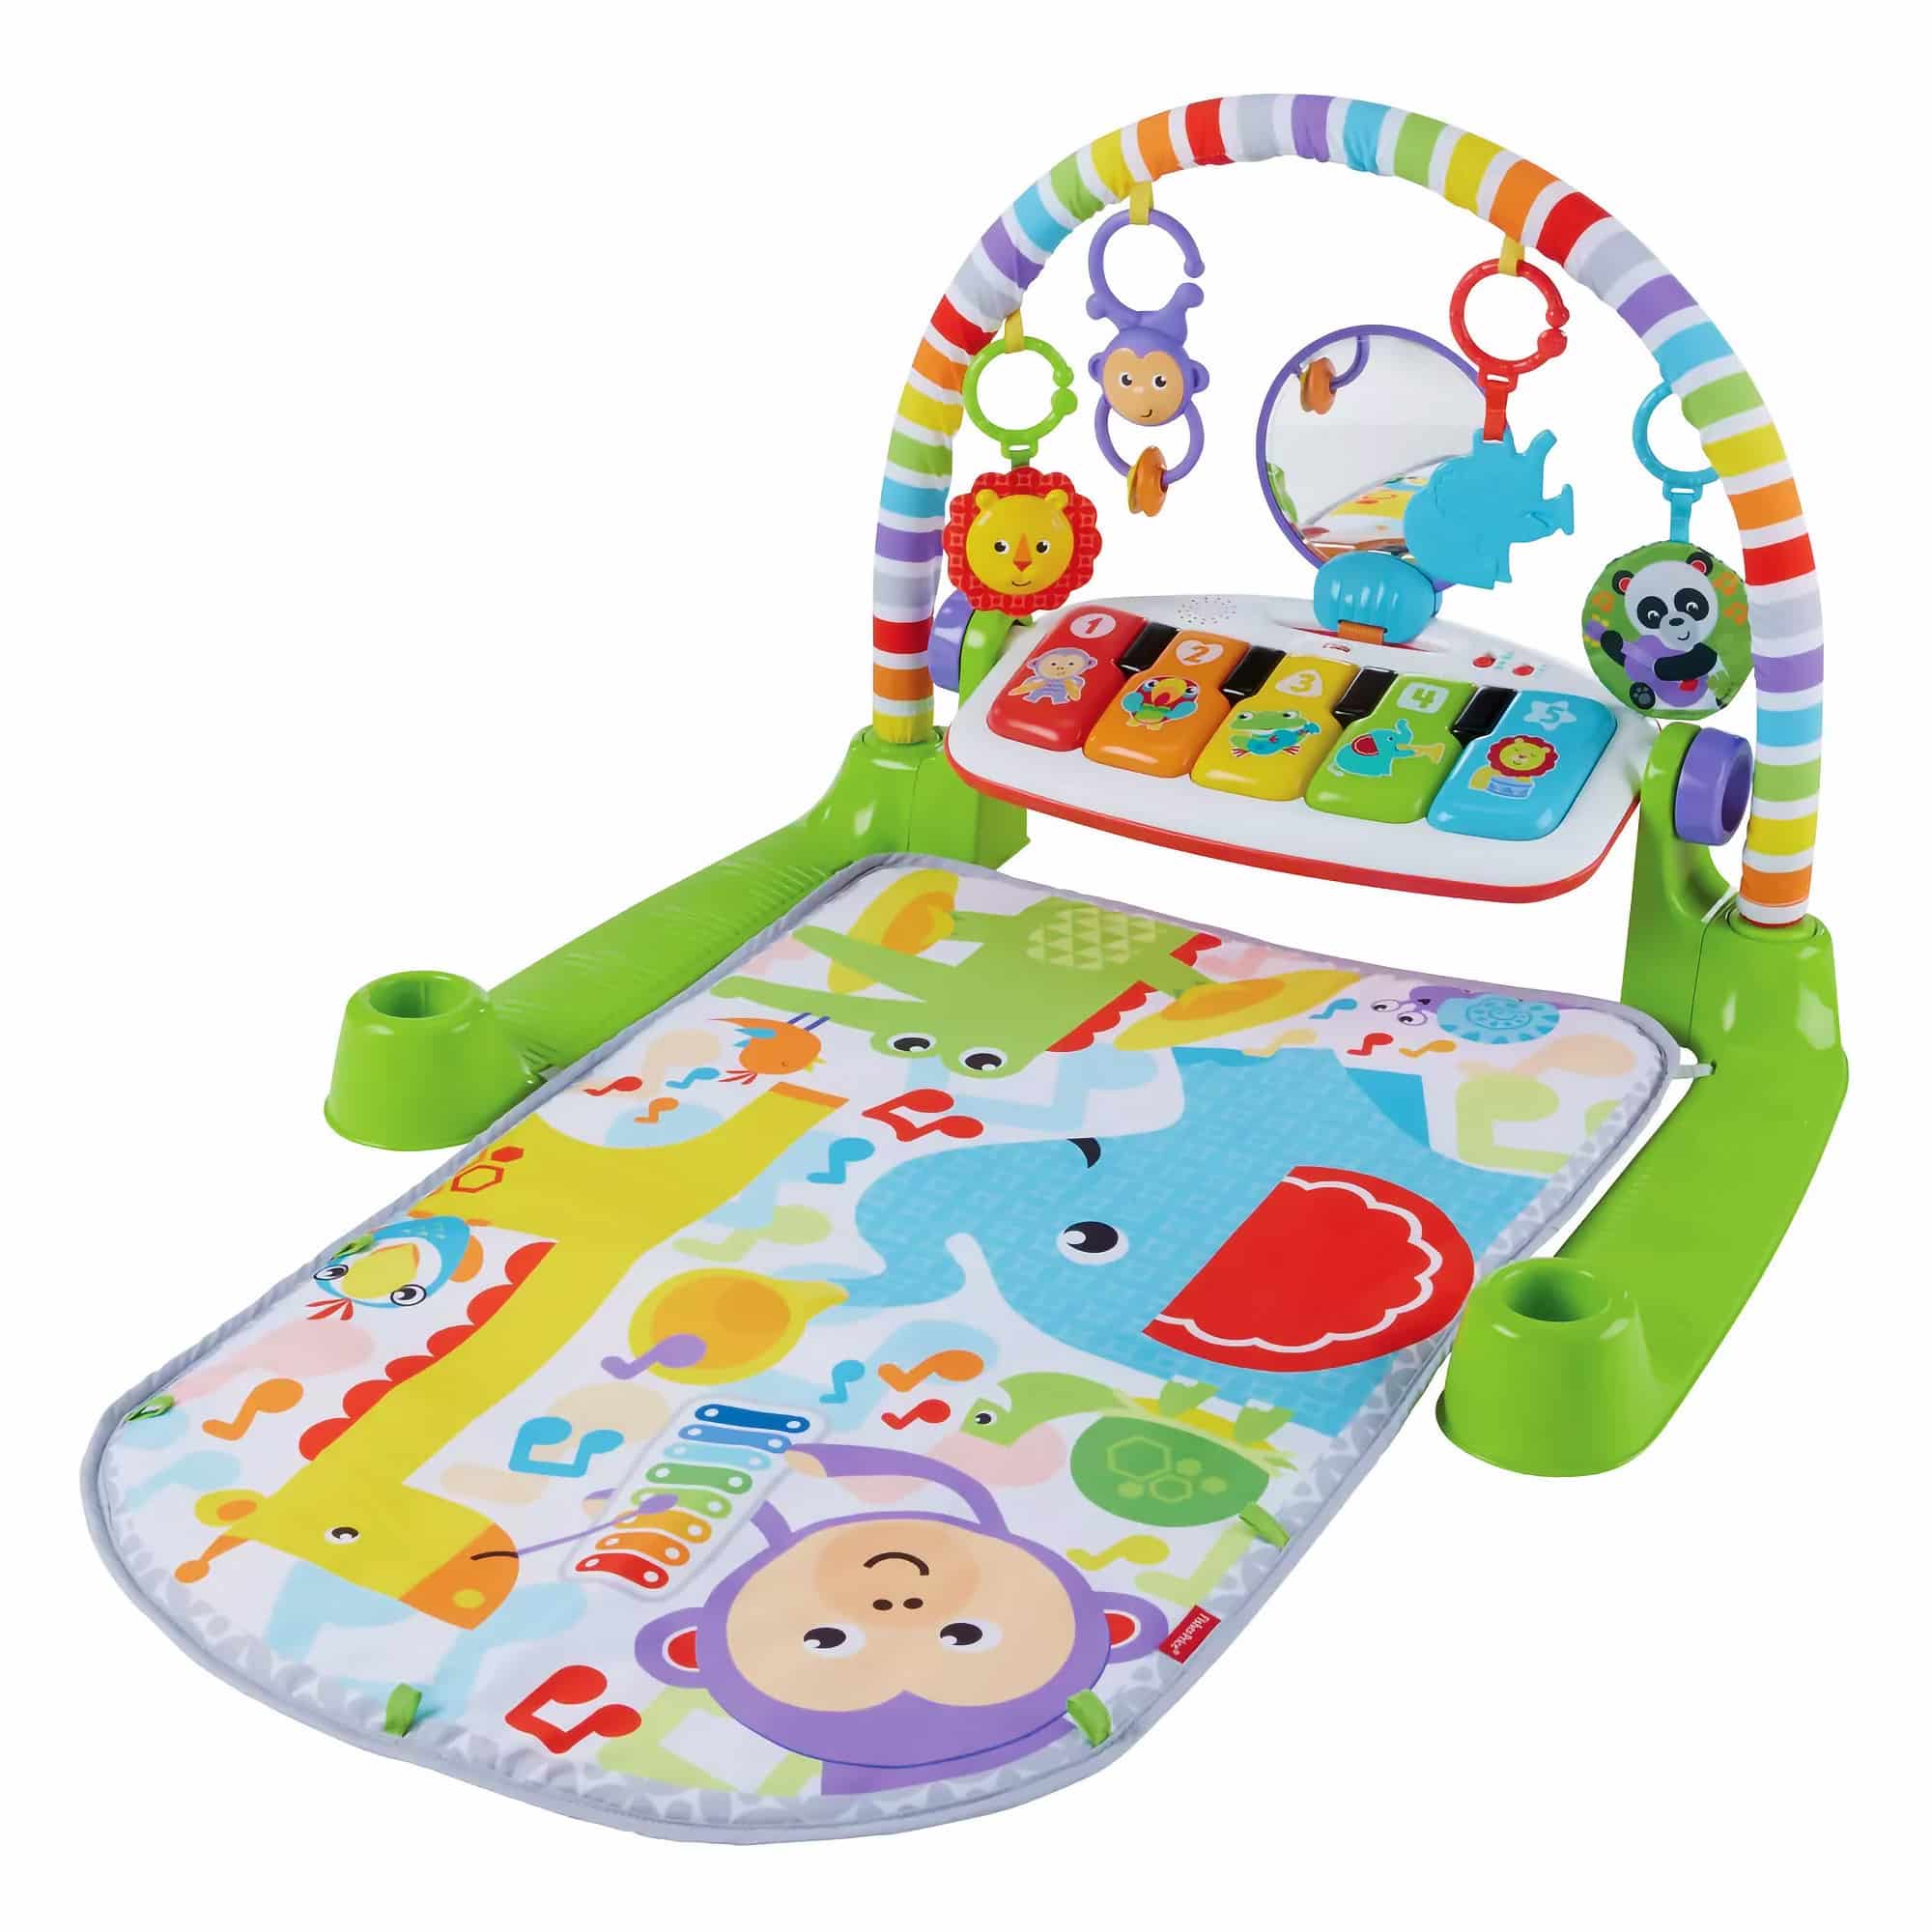 Fisher Price - Deluxe Kick & Play Piano Gym